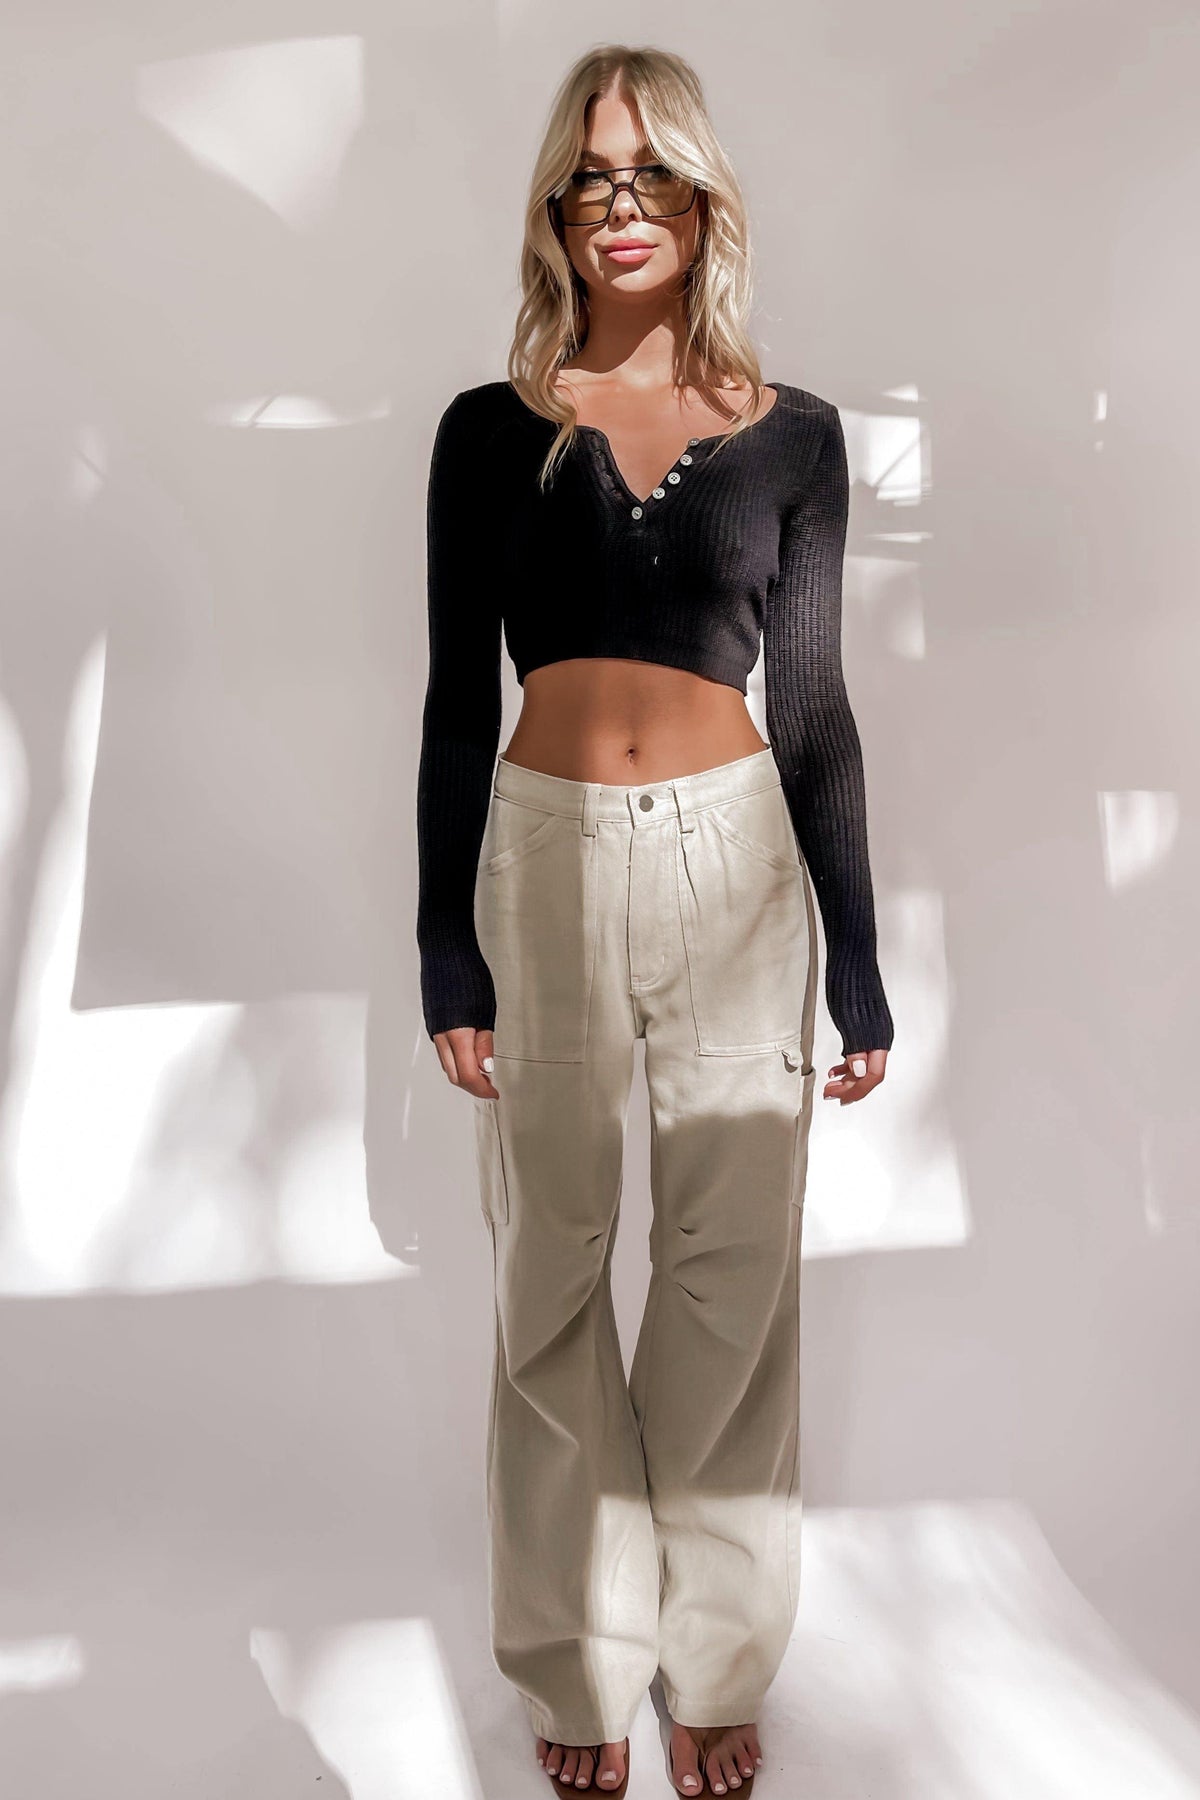 Viera Top, BASIC TOPS, BLACK, CROP TOPS, TOP, TOPS, VISCOSE &amp; NYLON &amp; POLYESTER, VISCOSE AND NYLON AND POLYESTER, Our New Viera Top Is Now Only $50.00 Exclusive At Mishkah, Our New Viera Top is now only $50.00-We Have The Latest Women&#39;s Tops @ Mishkah Online Fashion Boutique-MISHKAH